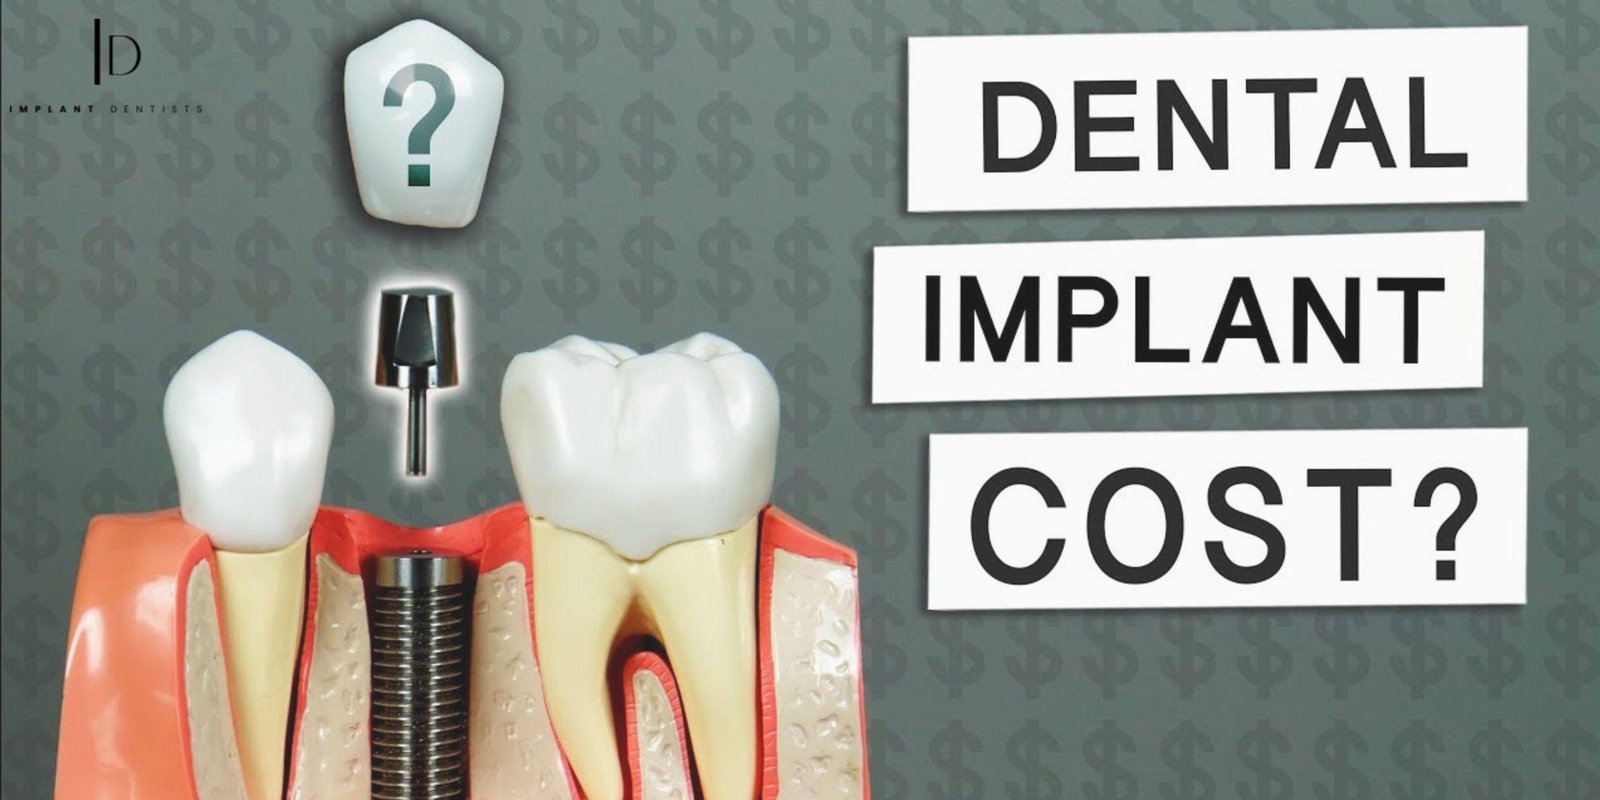 What Factors Influence the Cost of Dental Implants?